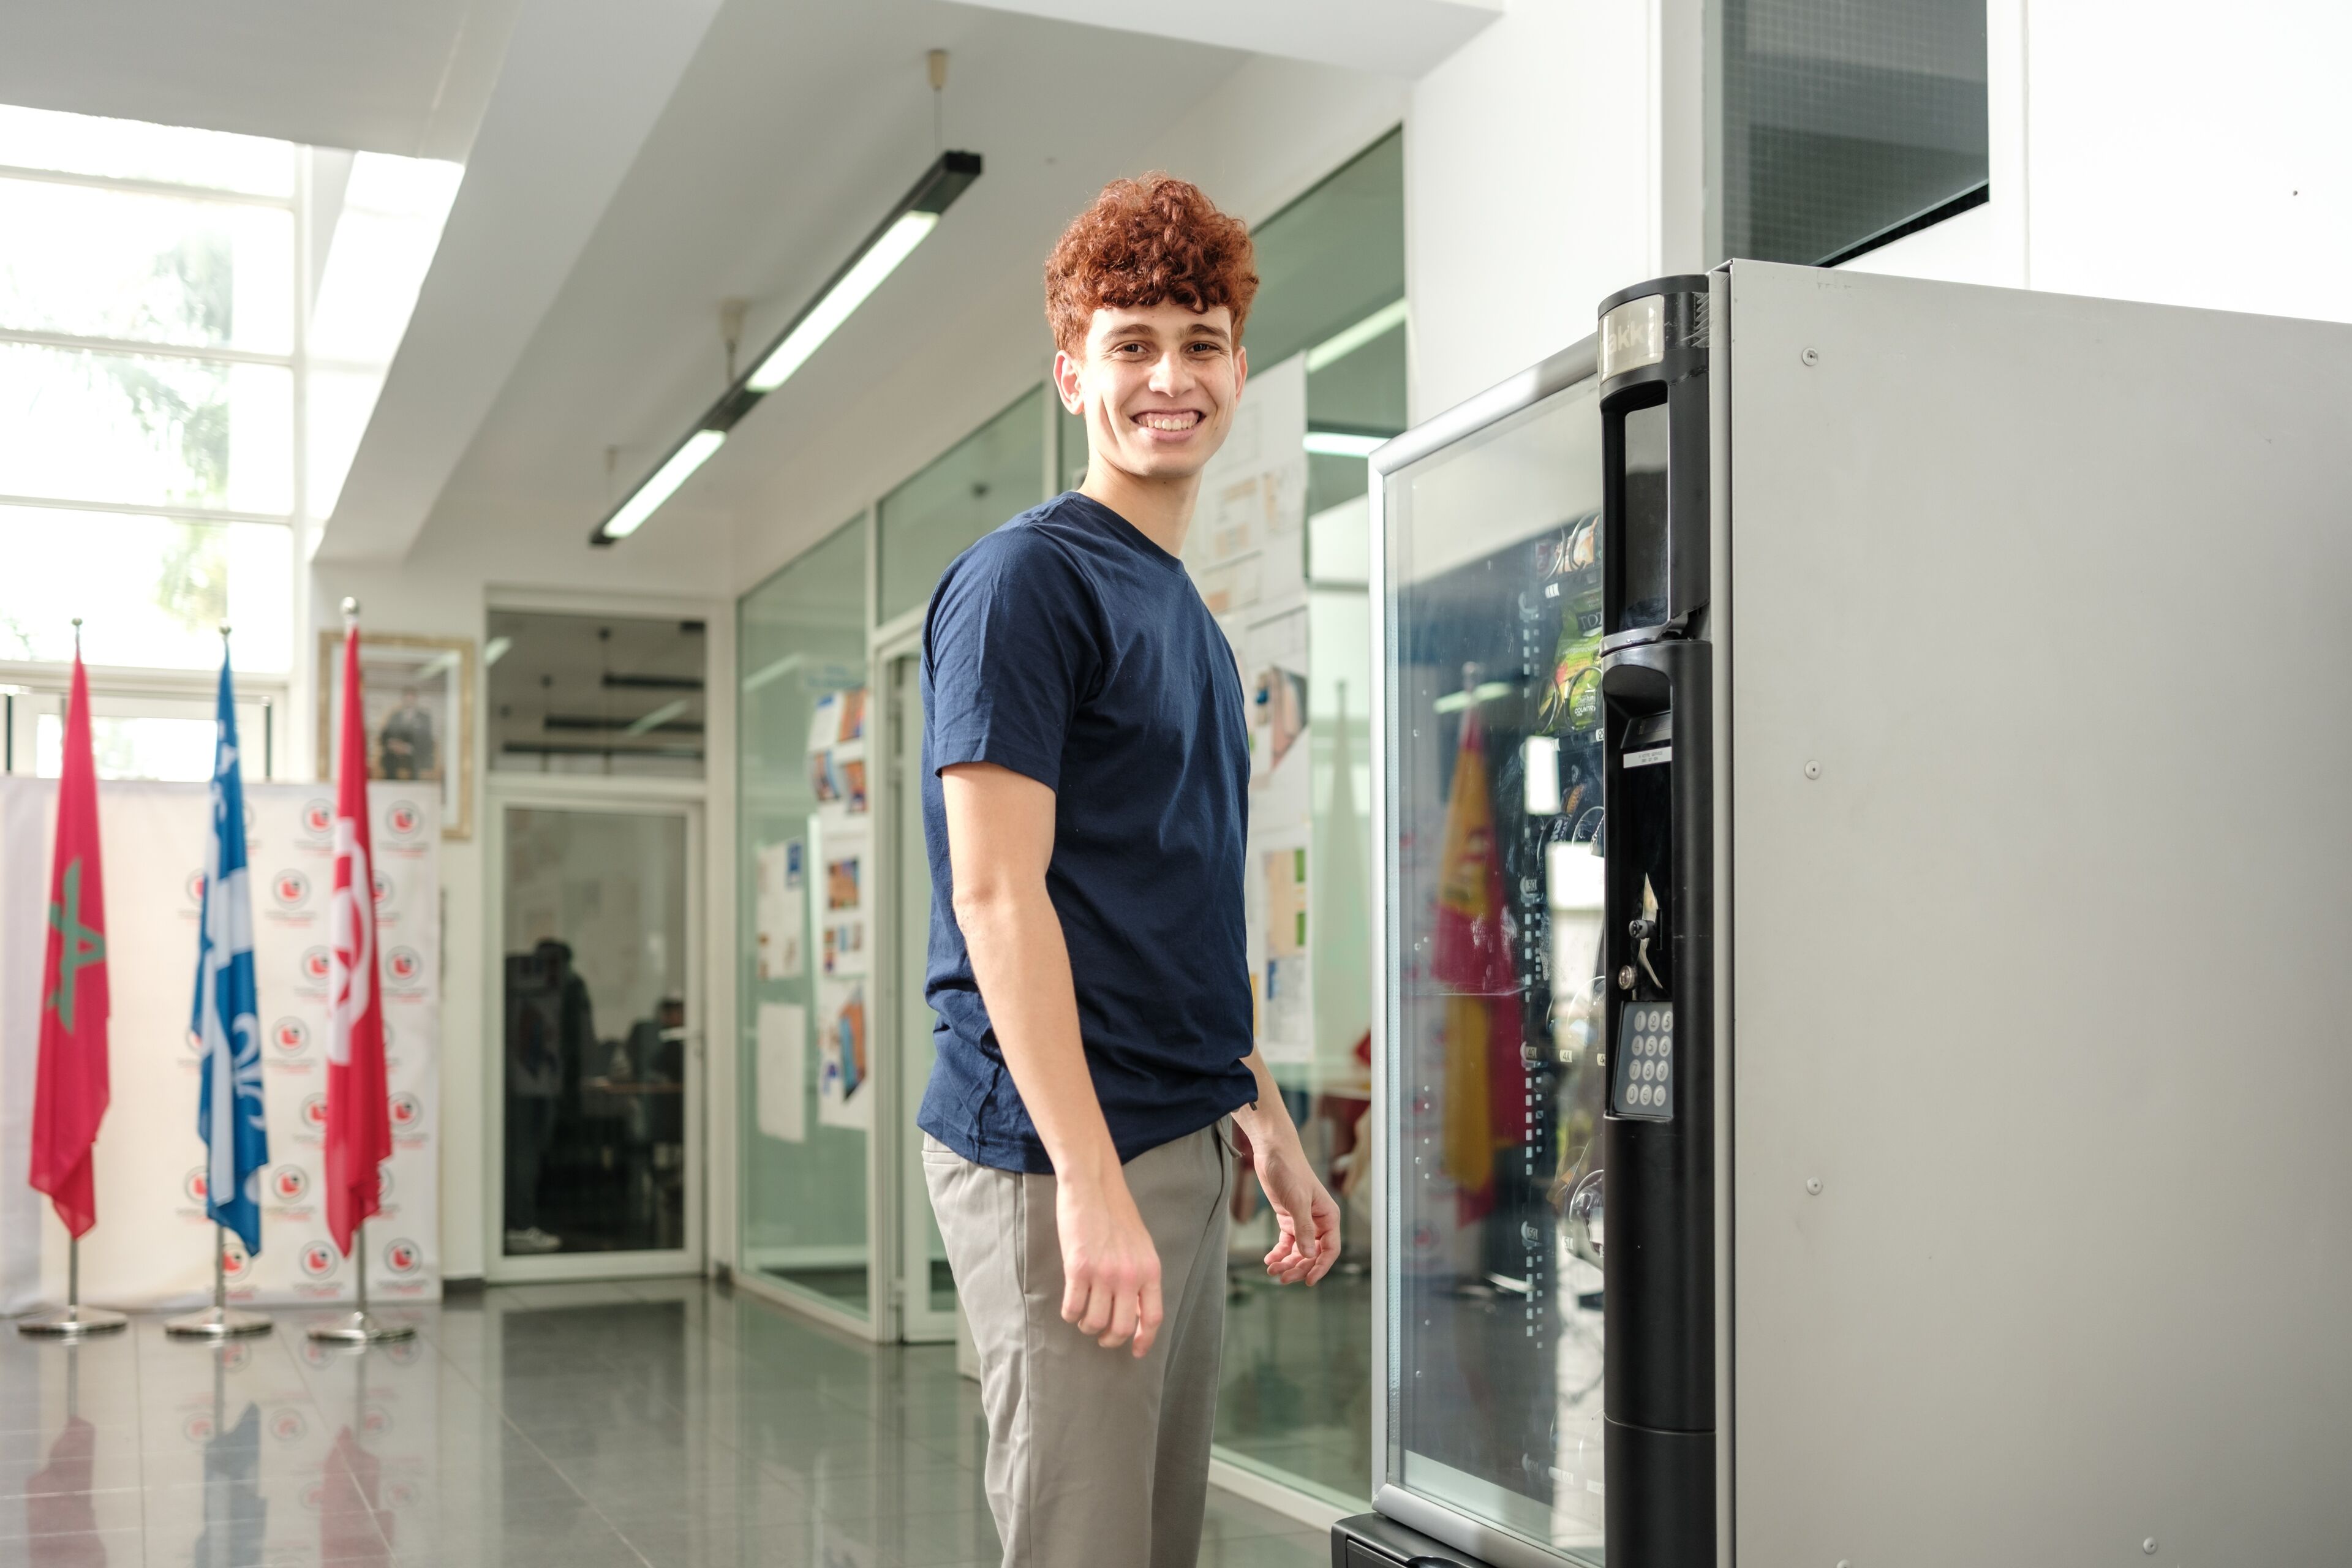 A young man smiles next to a vending machine in a bright corridor of an educational institution.